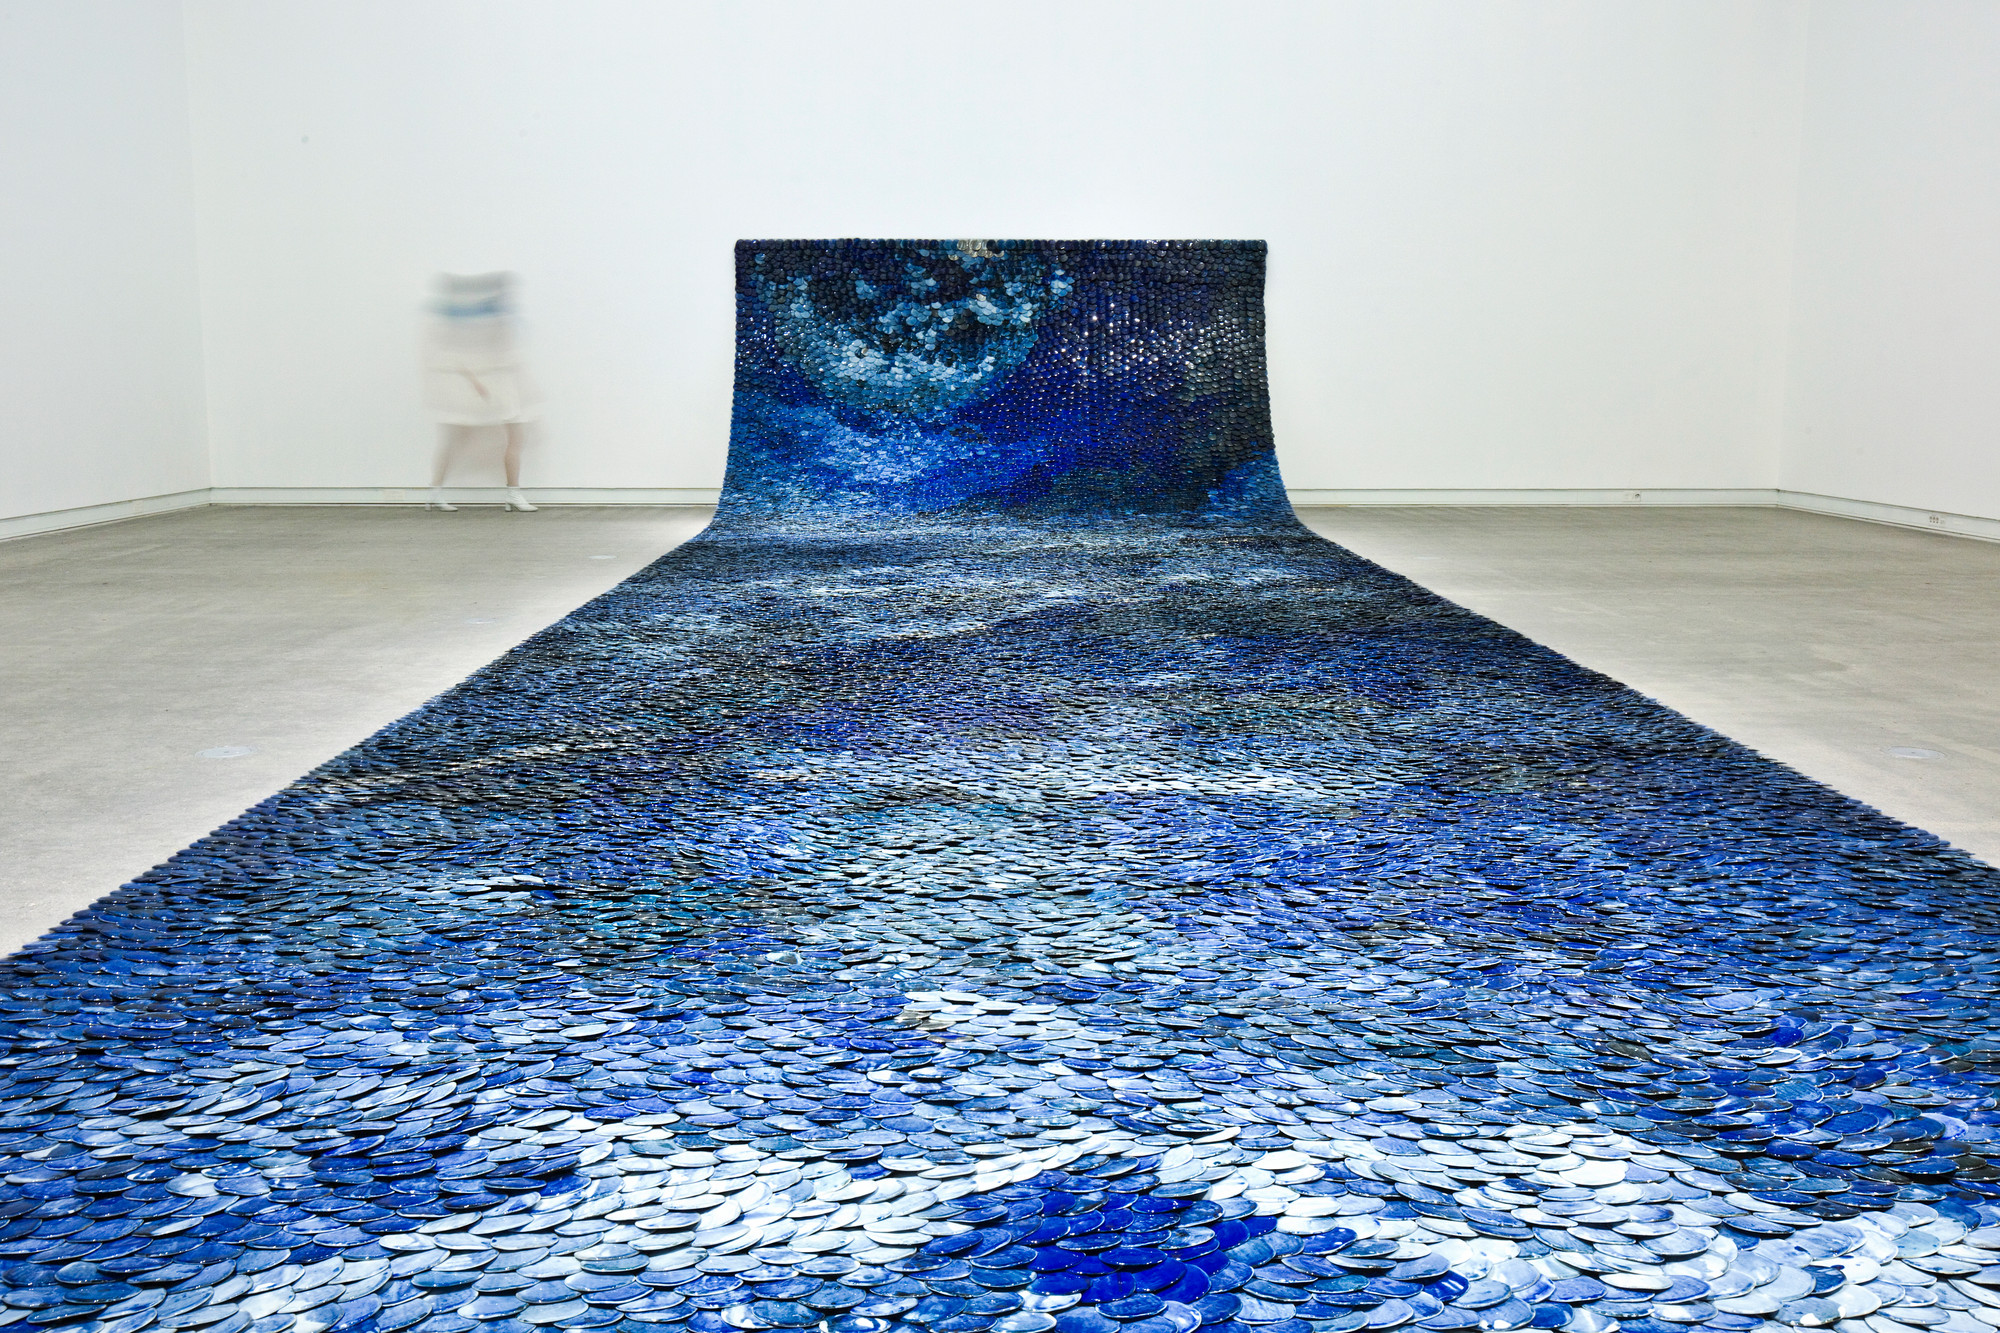 The Silk Roads, from The Exotic Dreams and Poetic Misunderstandings project. Solo exhibition at Kunsthall Grenland, 2019. Cobalt blue porcelain, 10 x 4 M. Photo: Aliona Pazdniakova